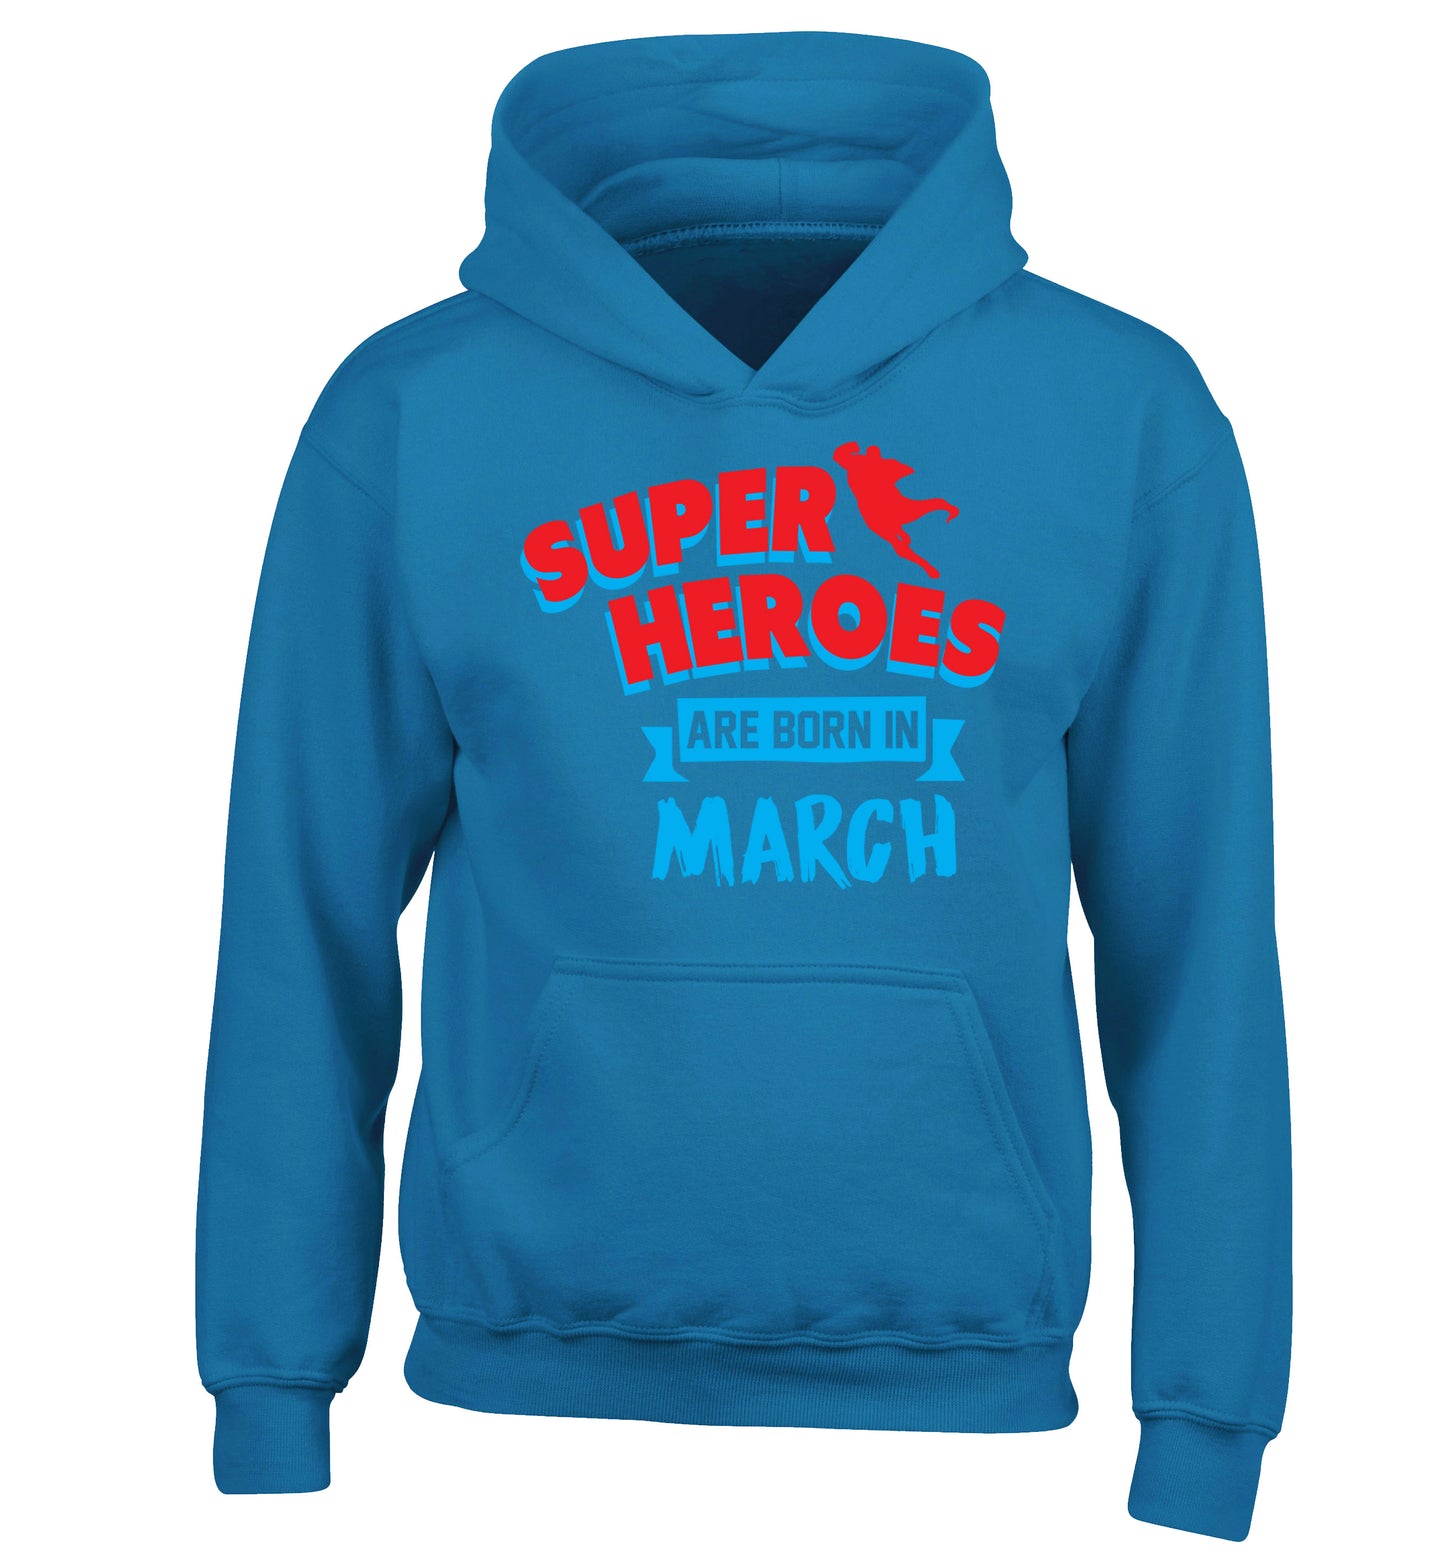 Superheros are born in March children's blue hoodie 12-13 Years